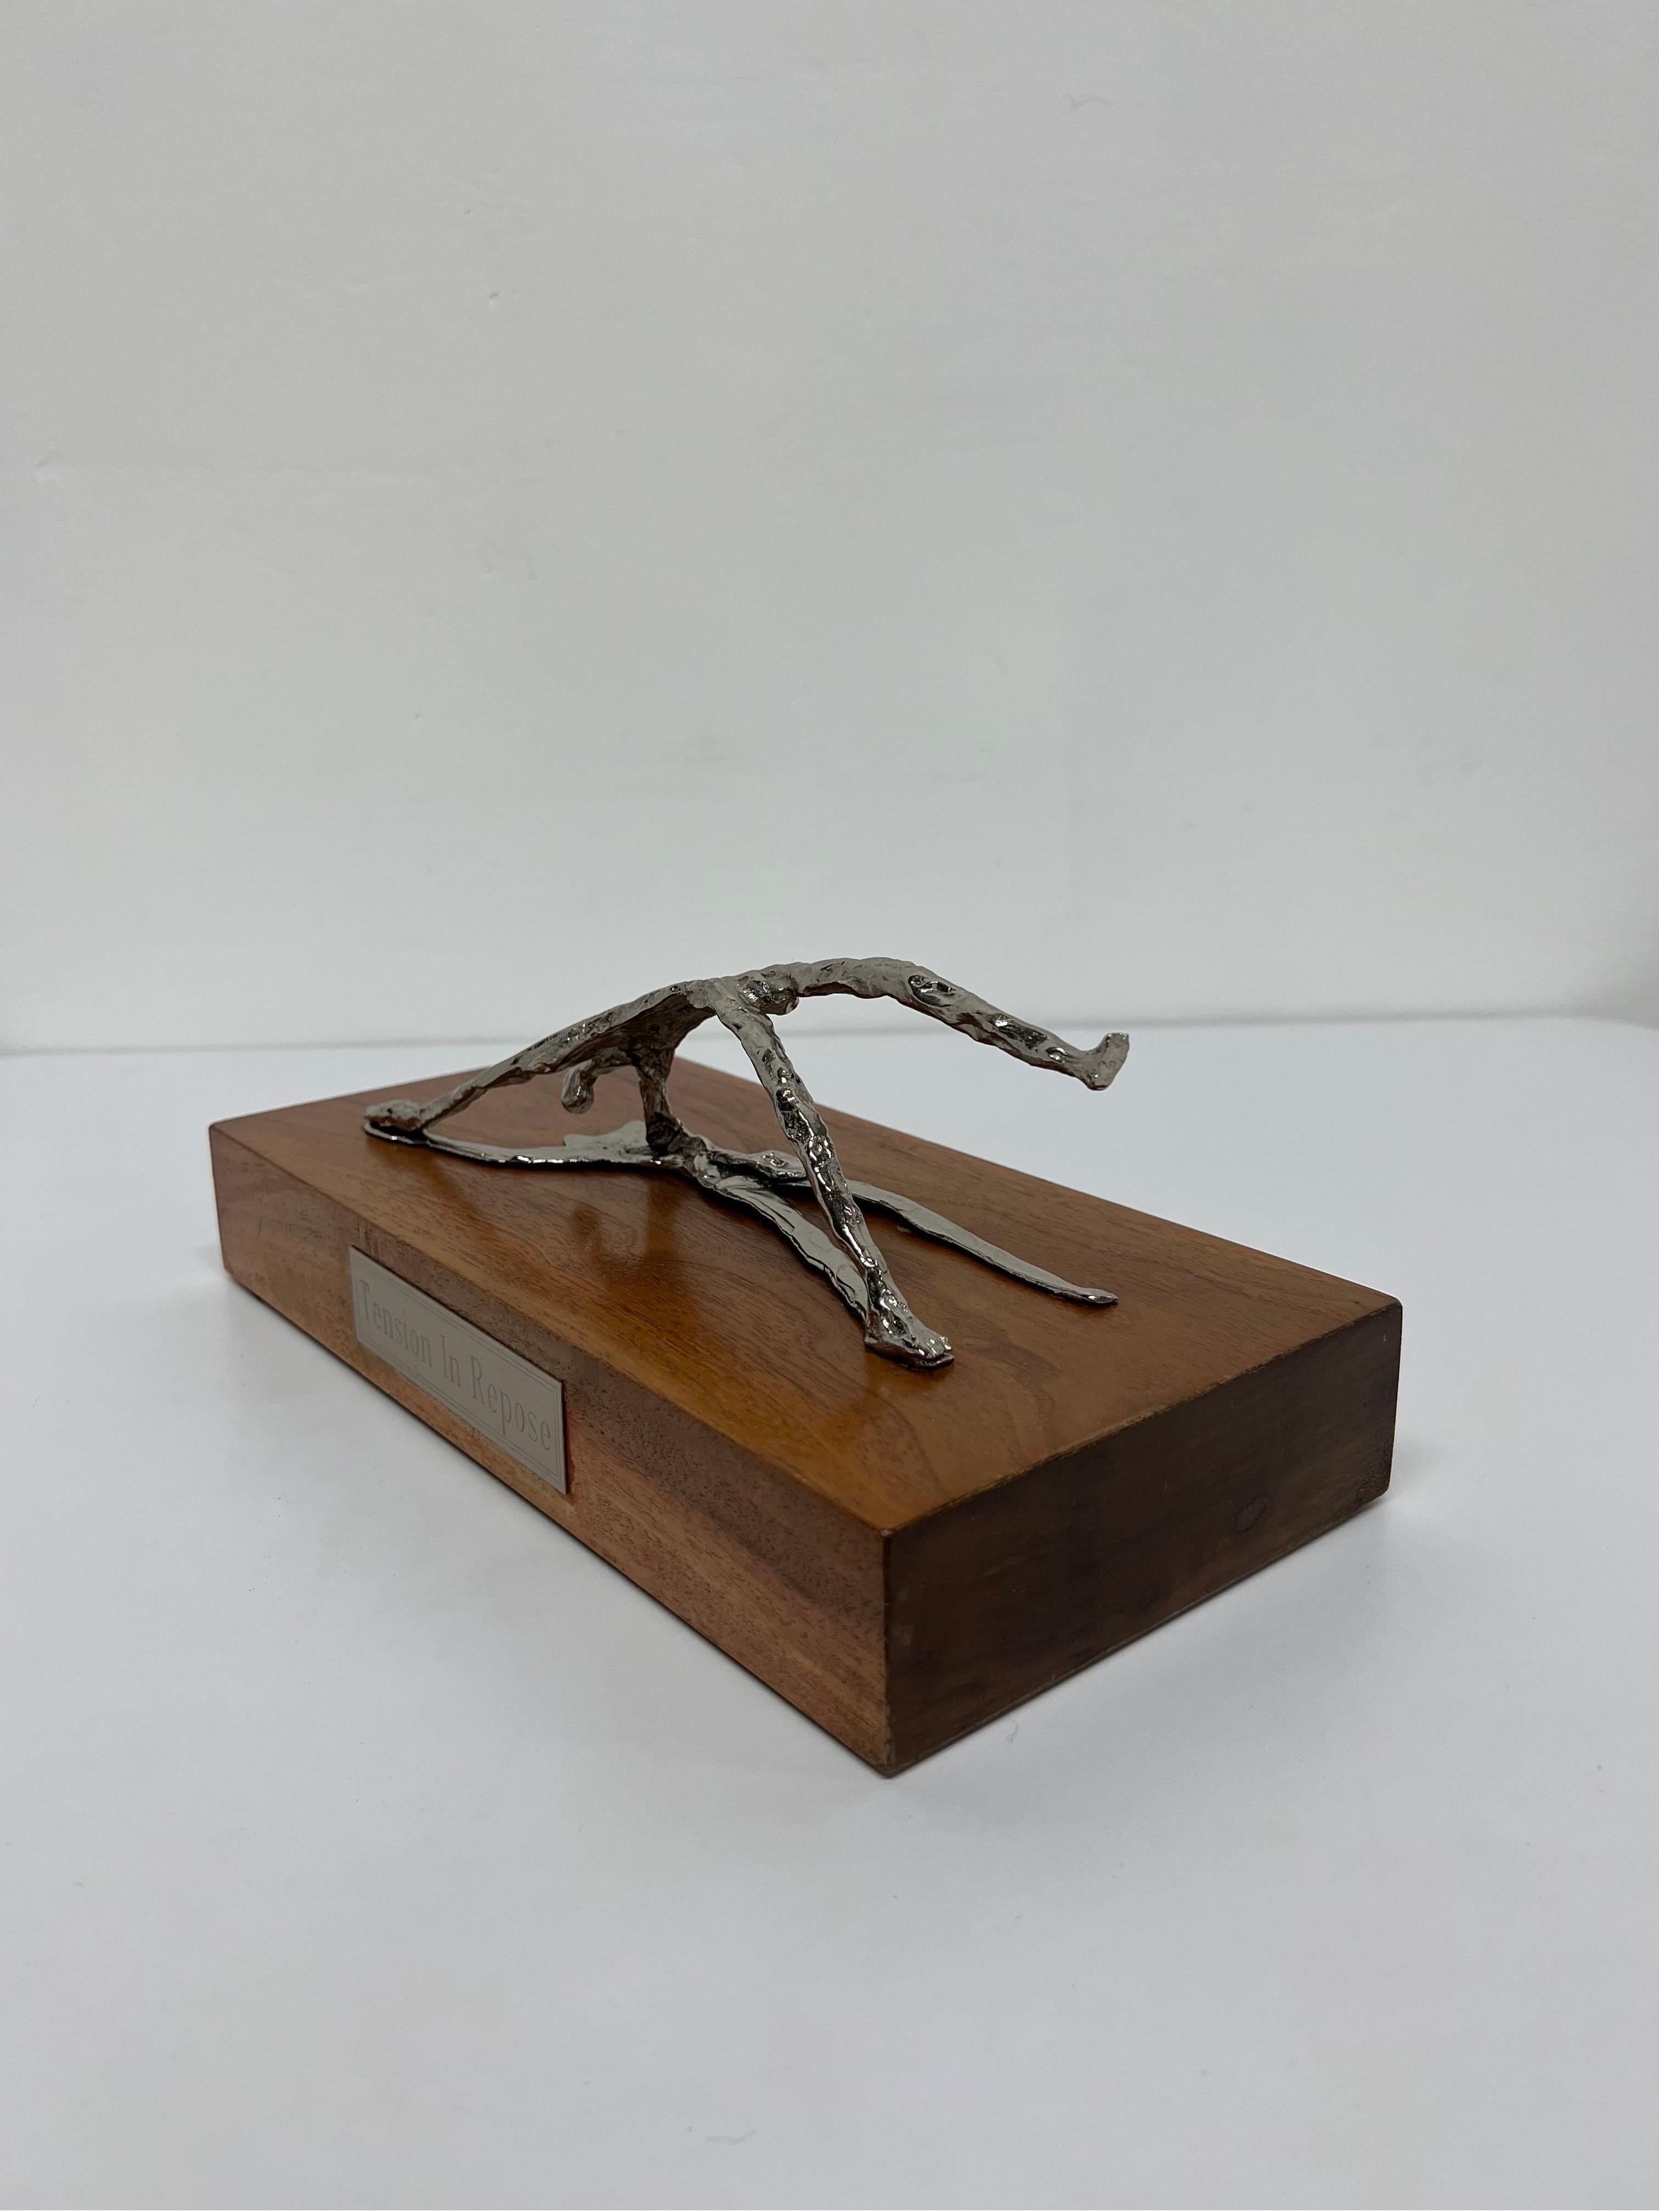 Contemporary Metal Sculpture Titled 